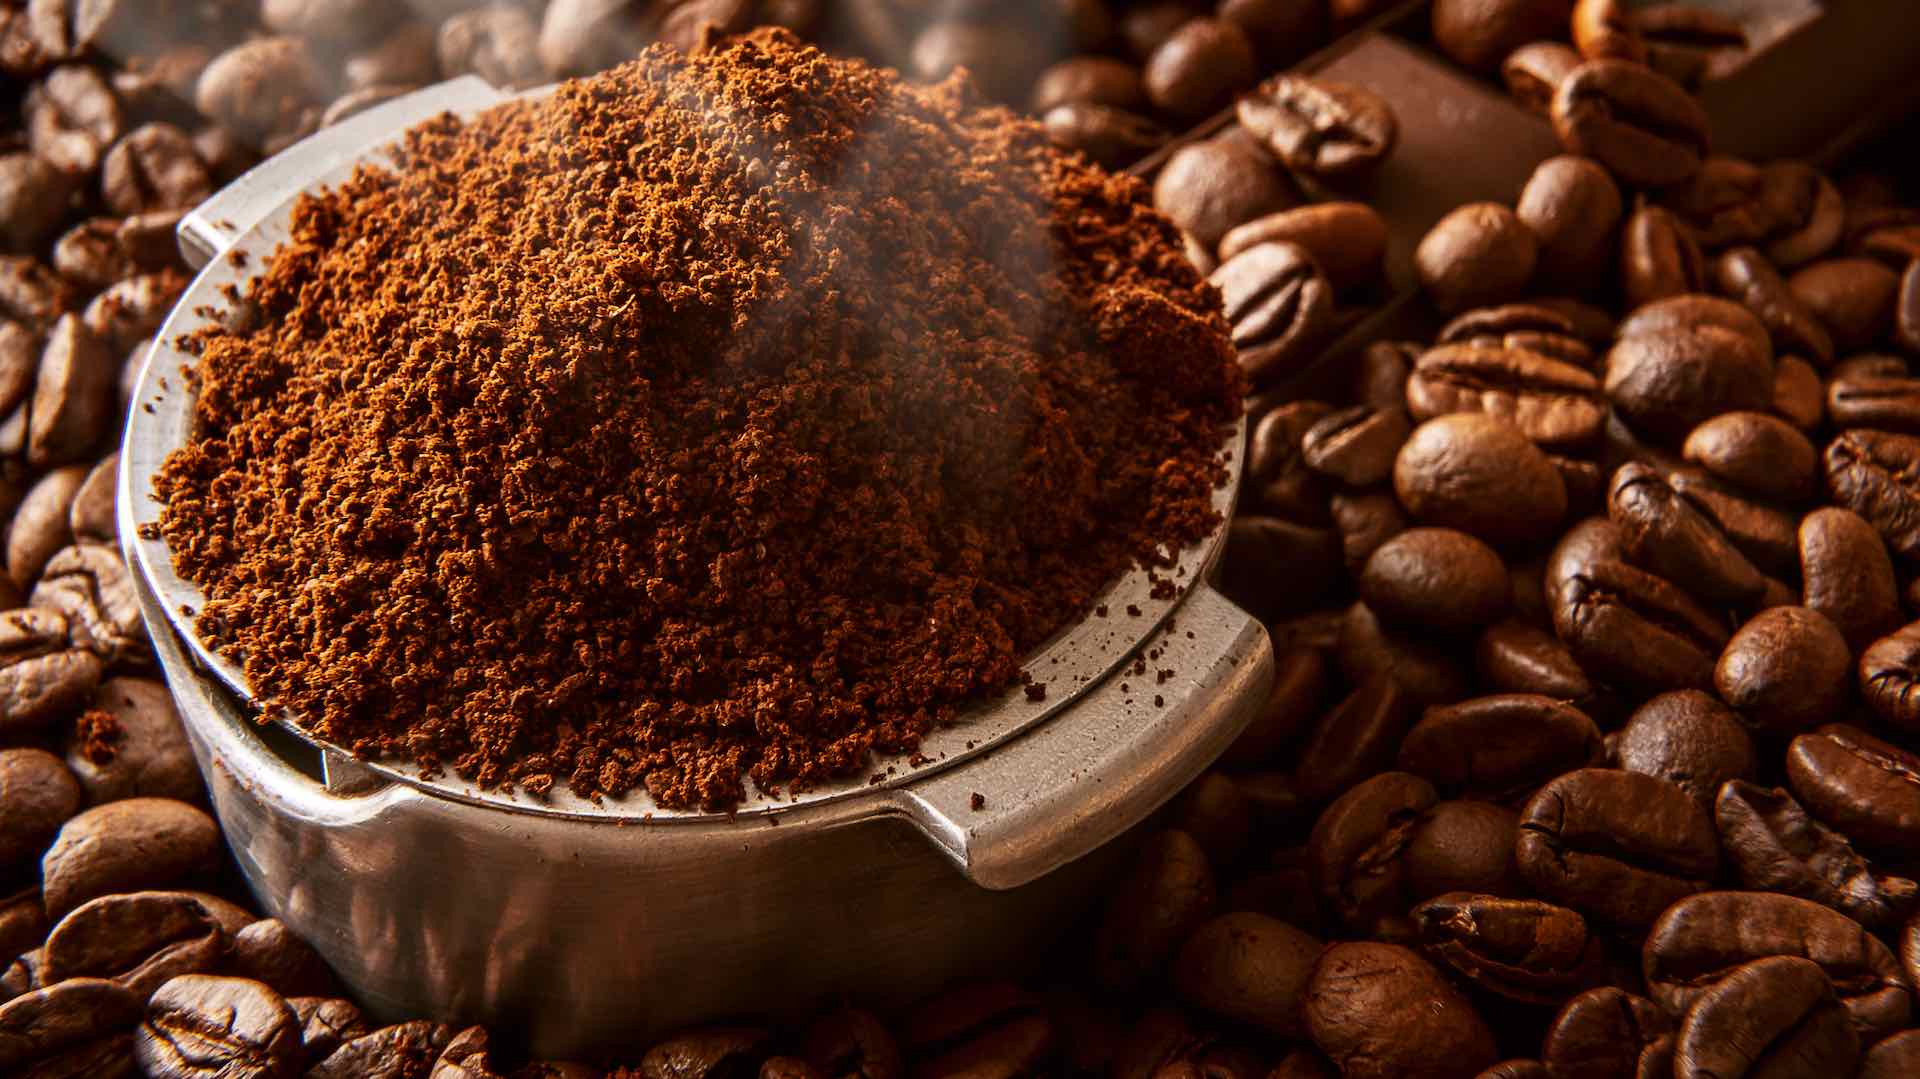 Brewing hope - how used coffee grounds may combat Alzheimer's and Parkinson's